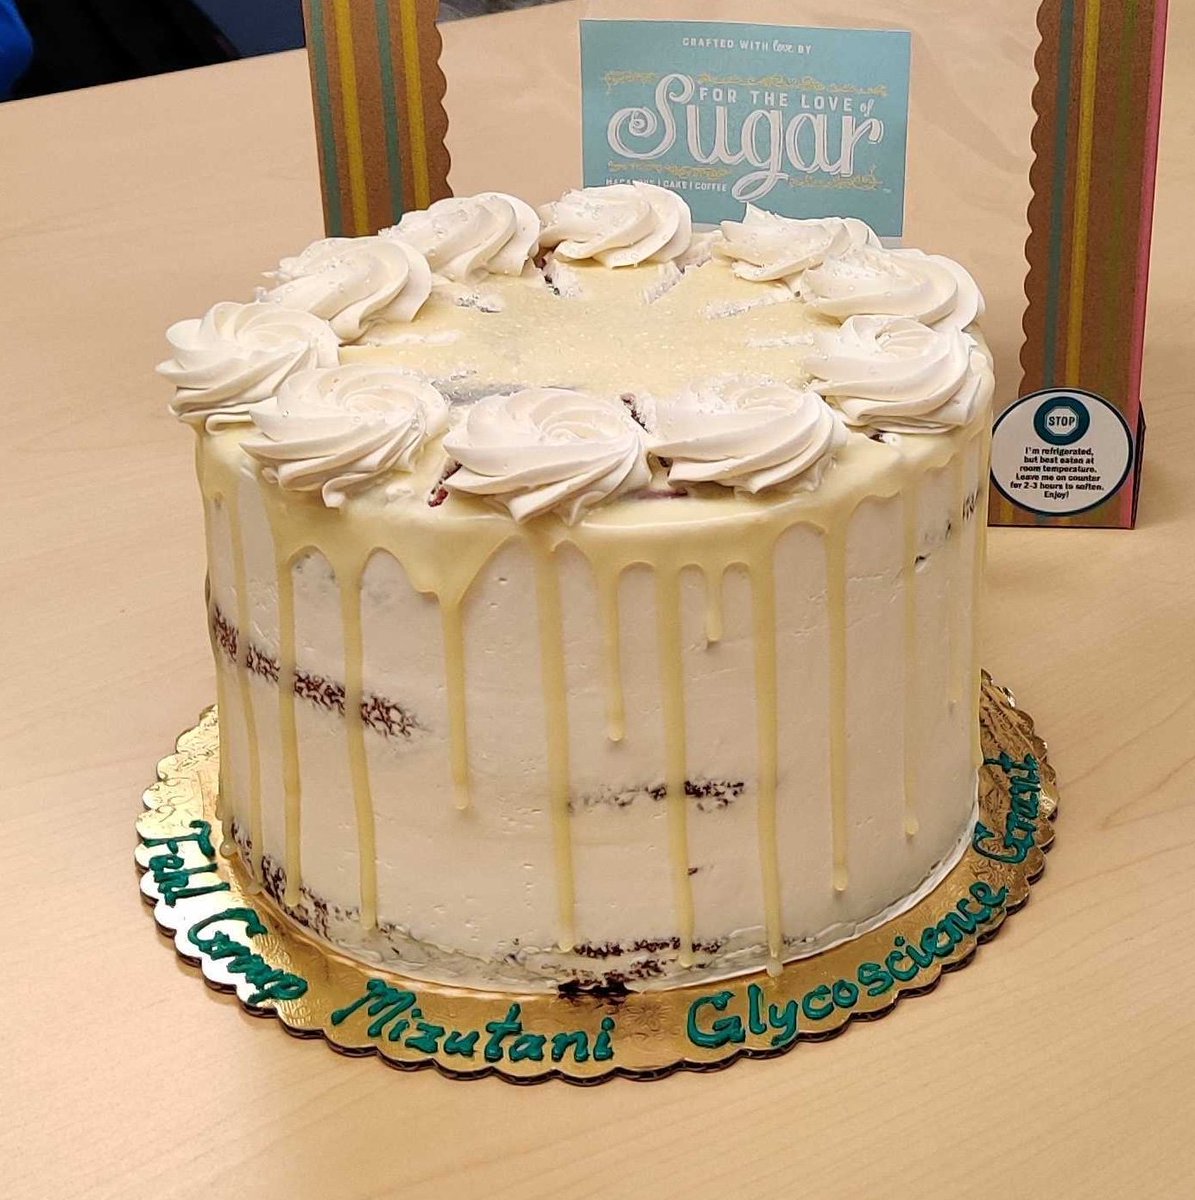 We got some pretty 'sweet' news yesterday - the Fehl Lab celebrated receiving an exciting Mizutani Foundation for Glycoscience Research Grant for our light-activated #chemicalbiology #glycotime tools. Note the bakery name - maybe that will be a future grant title!